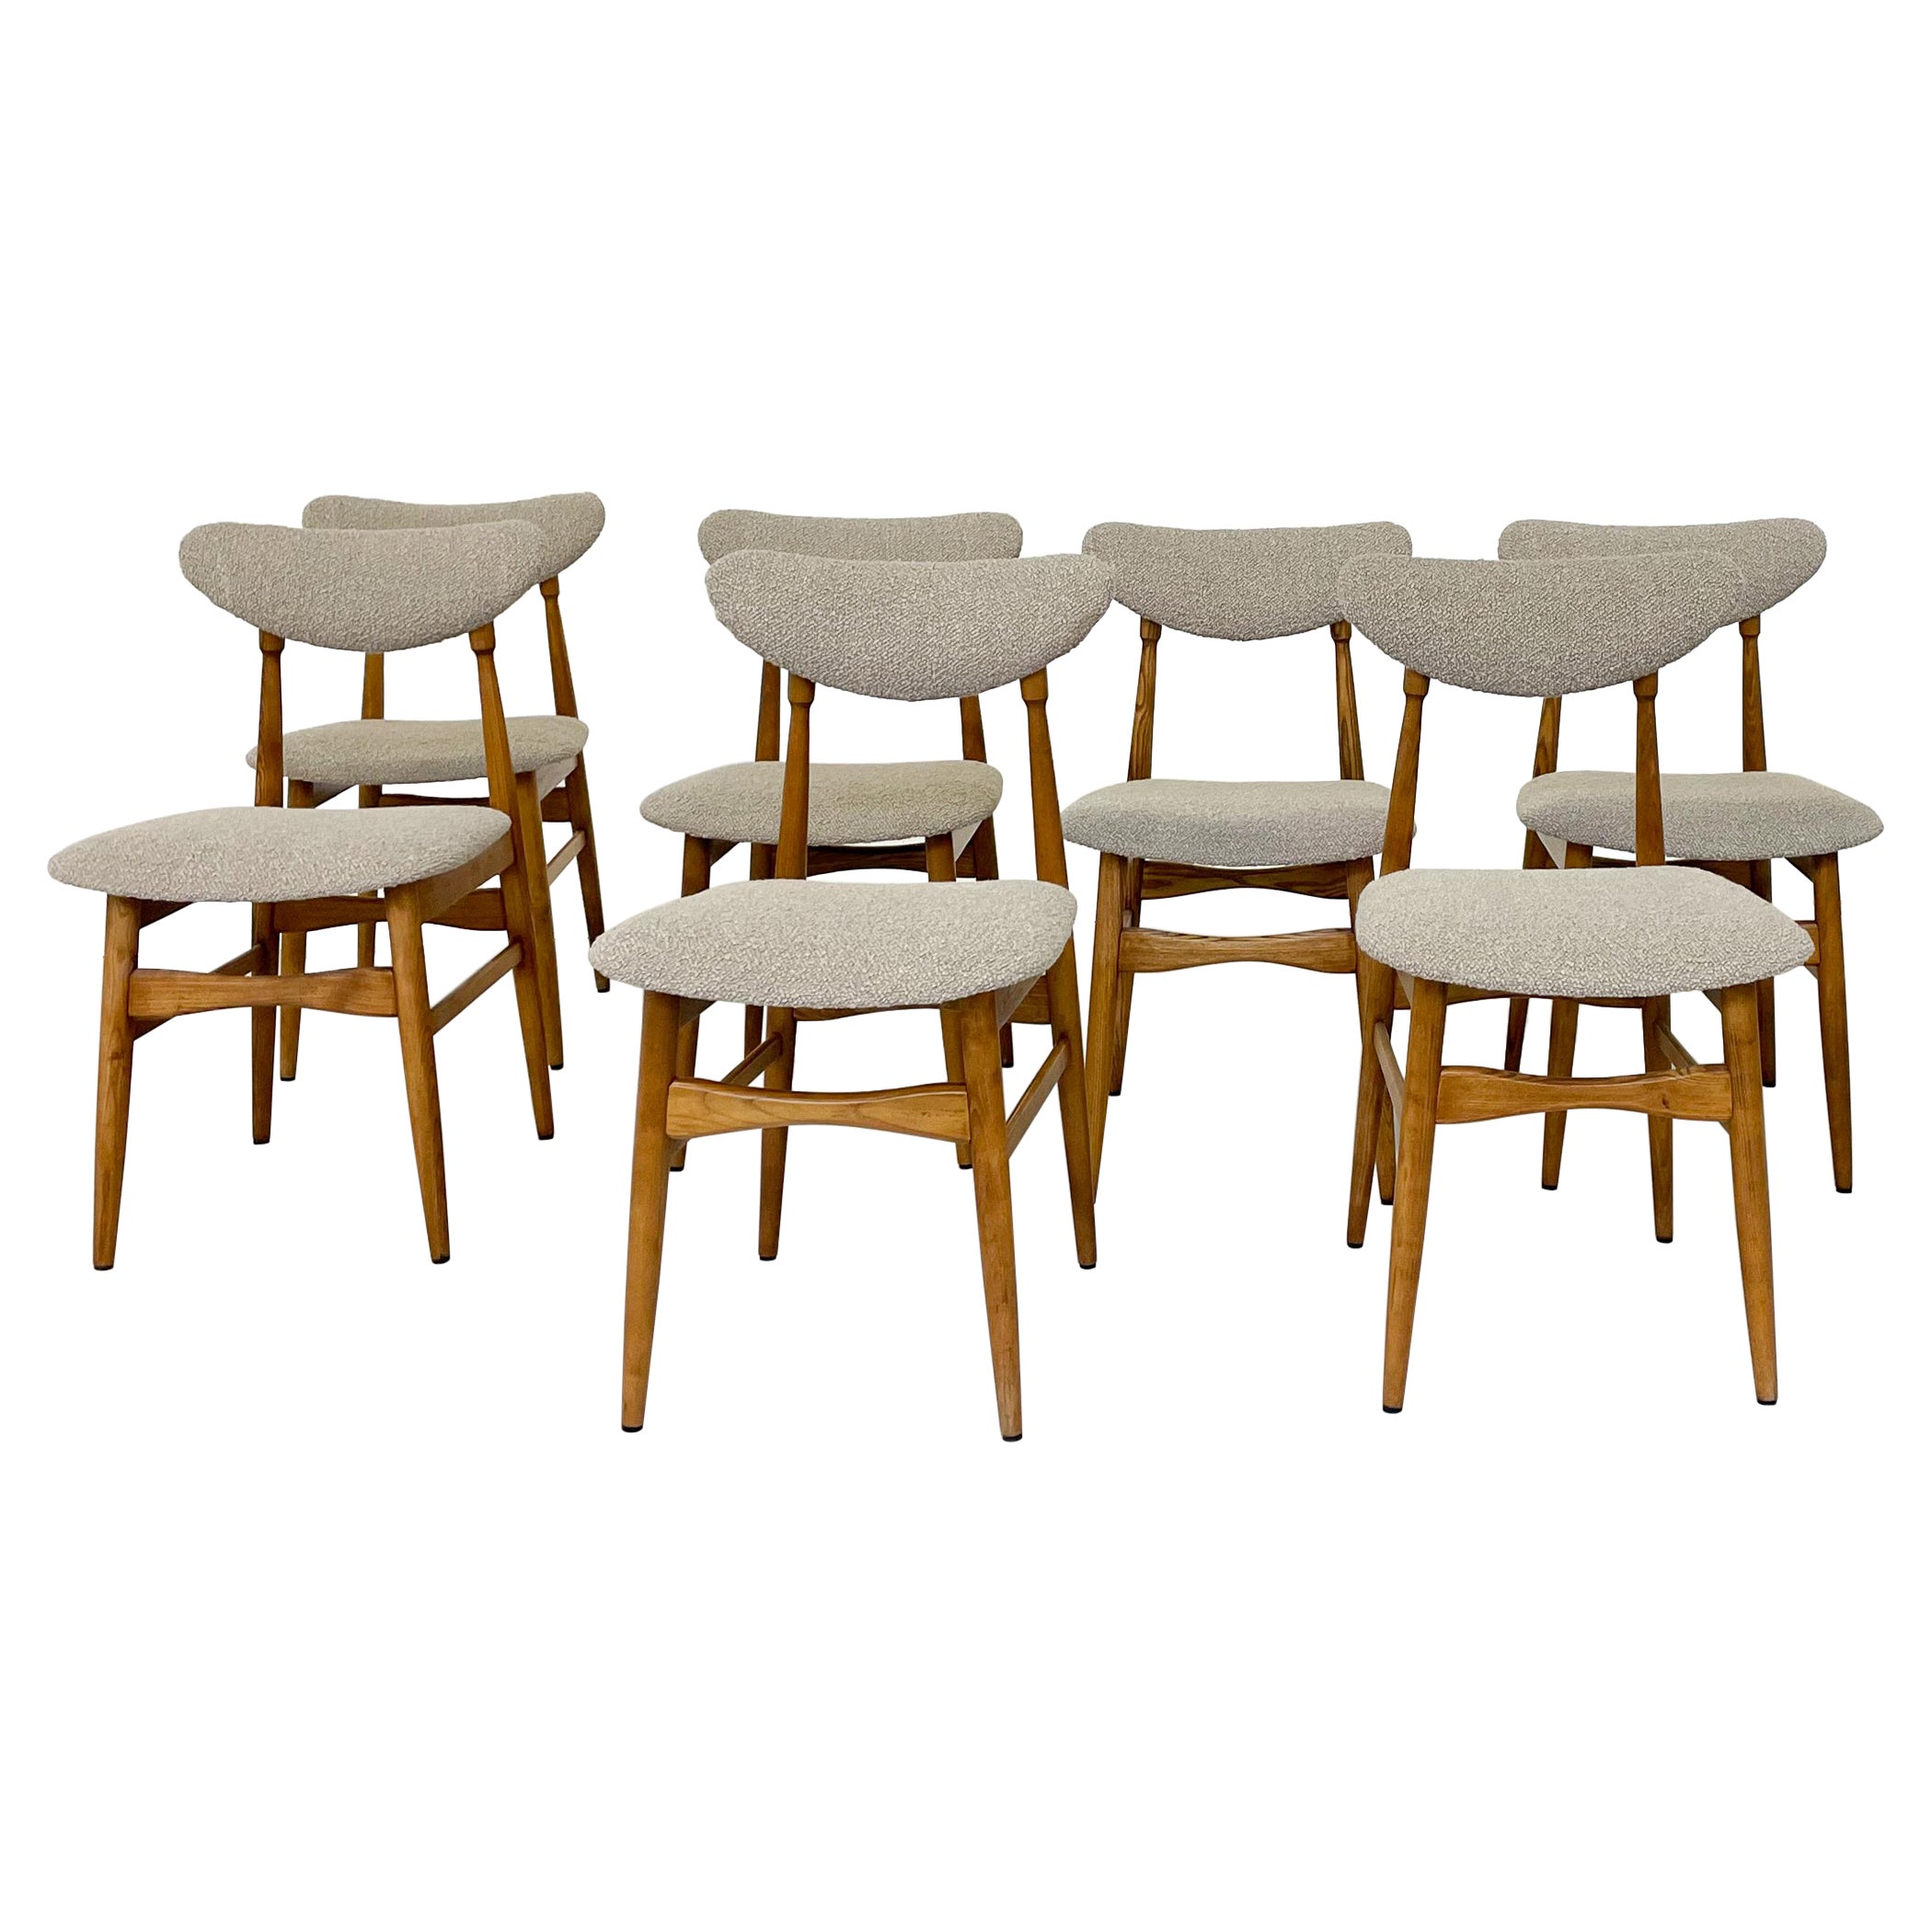 The Modernity Set of 12 Chairs, Italie, 1960s - New Upholstery en vente